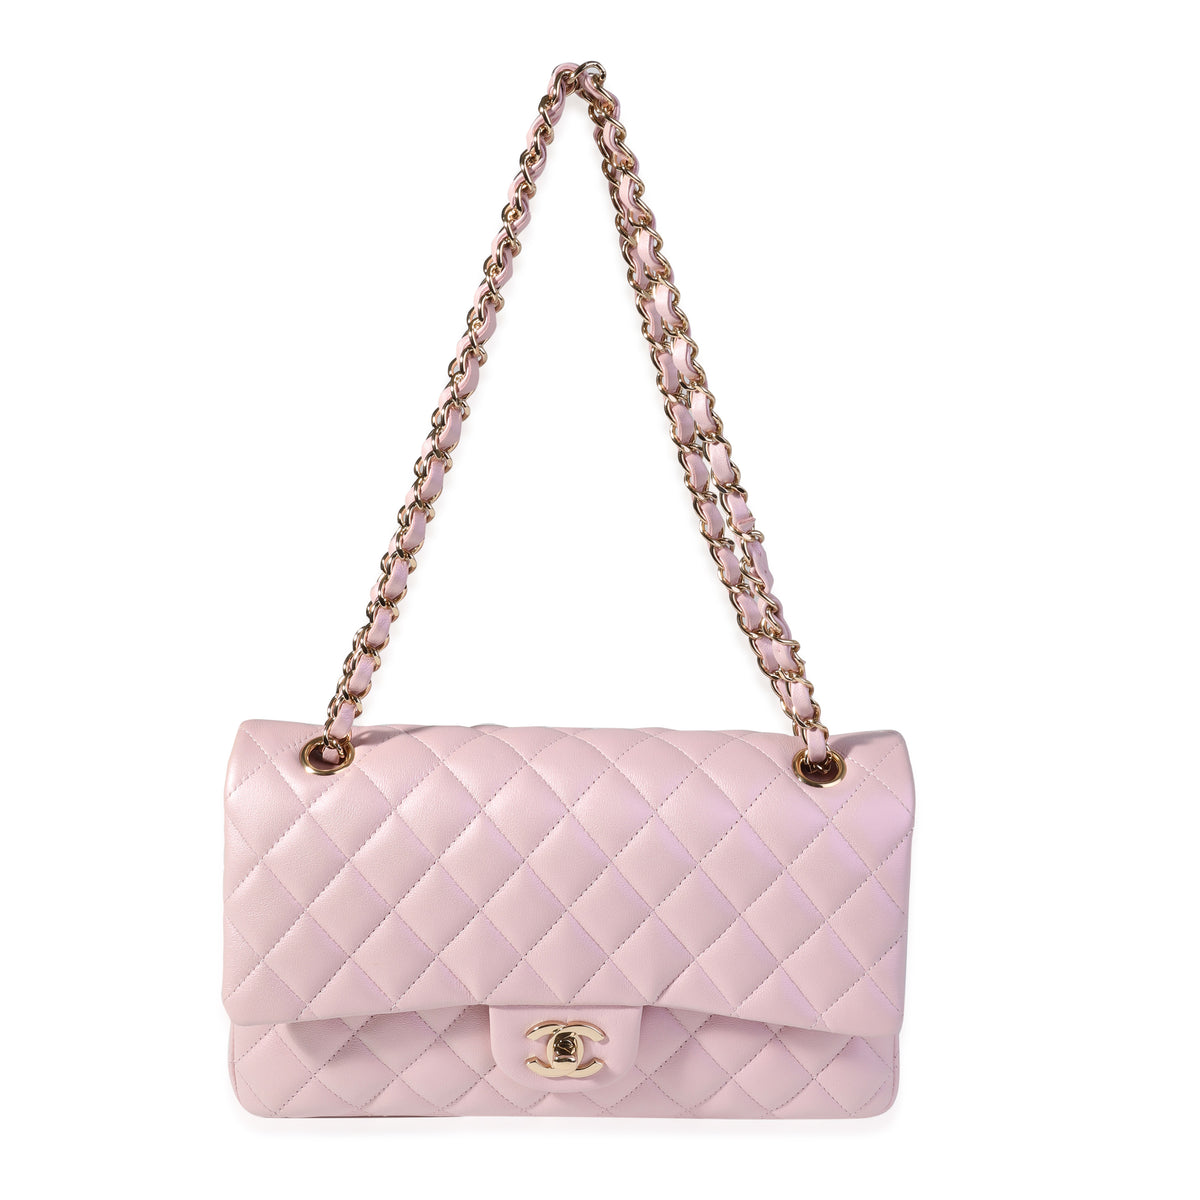 vintage chanel pouch pink